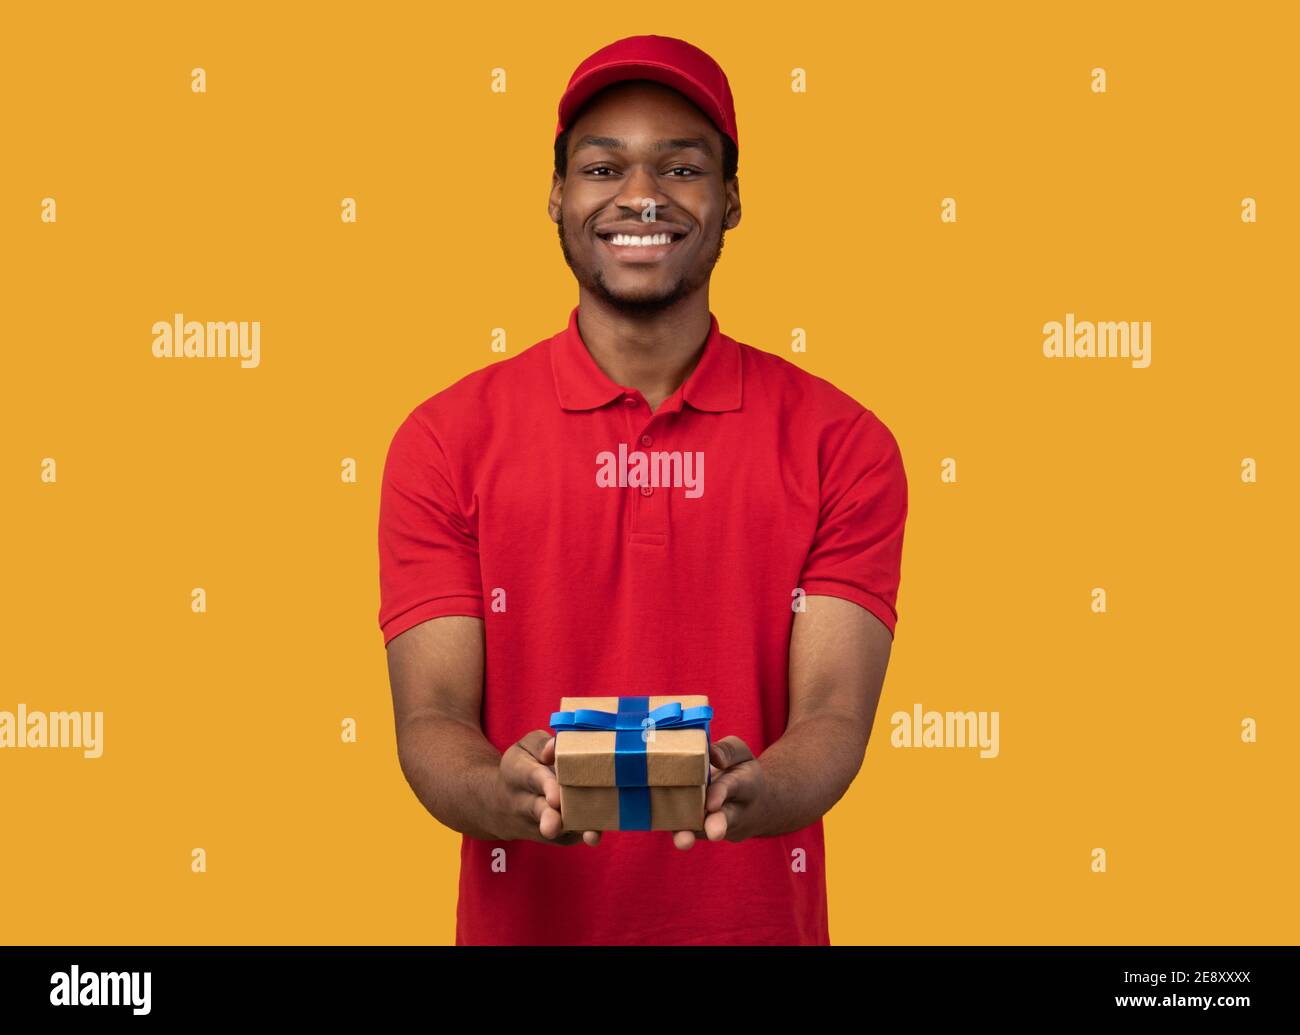 Black delivery guy holding gift box showing it to camera Stock Photo